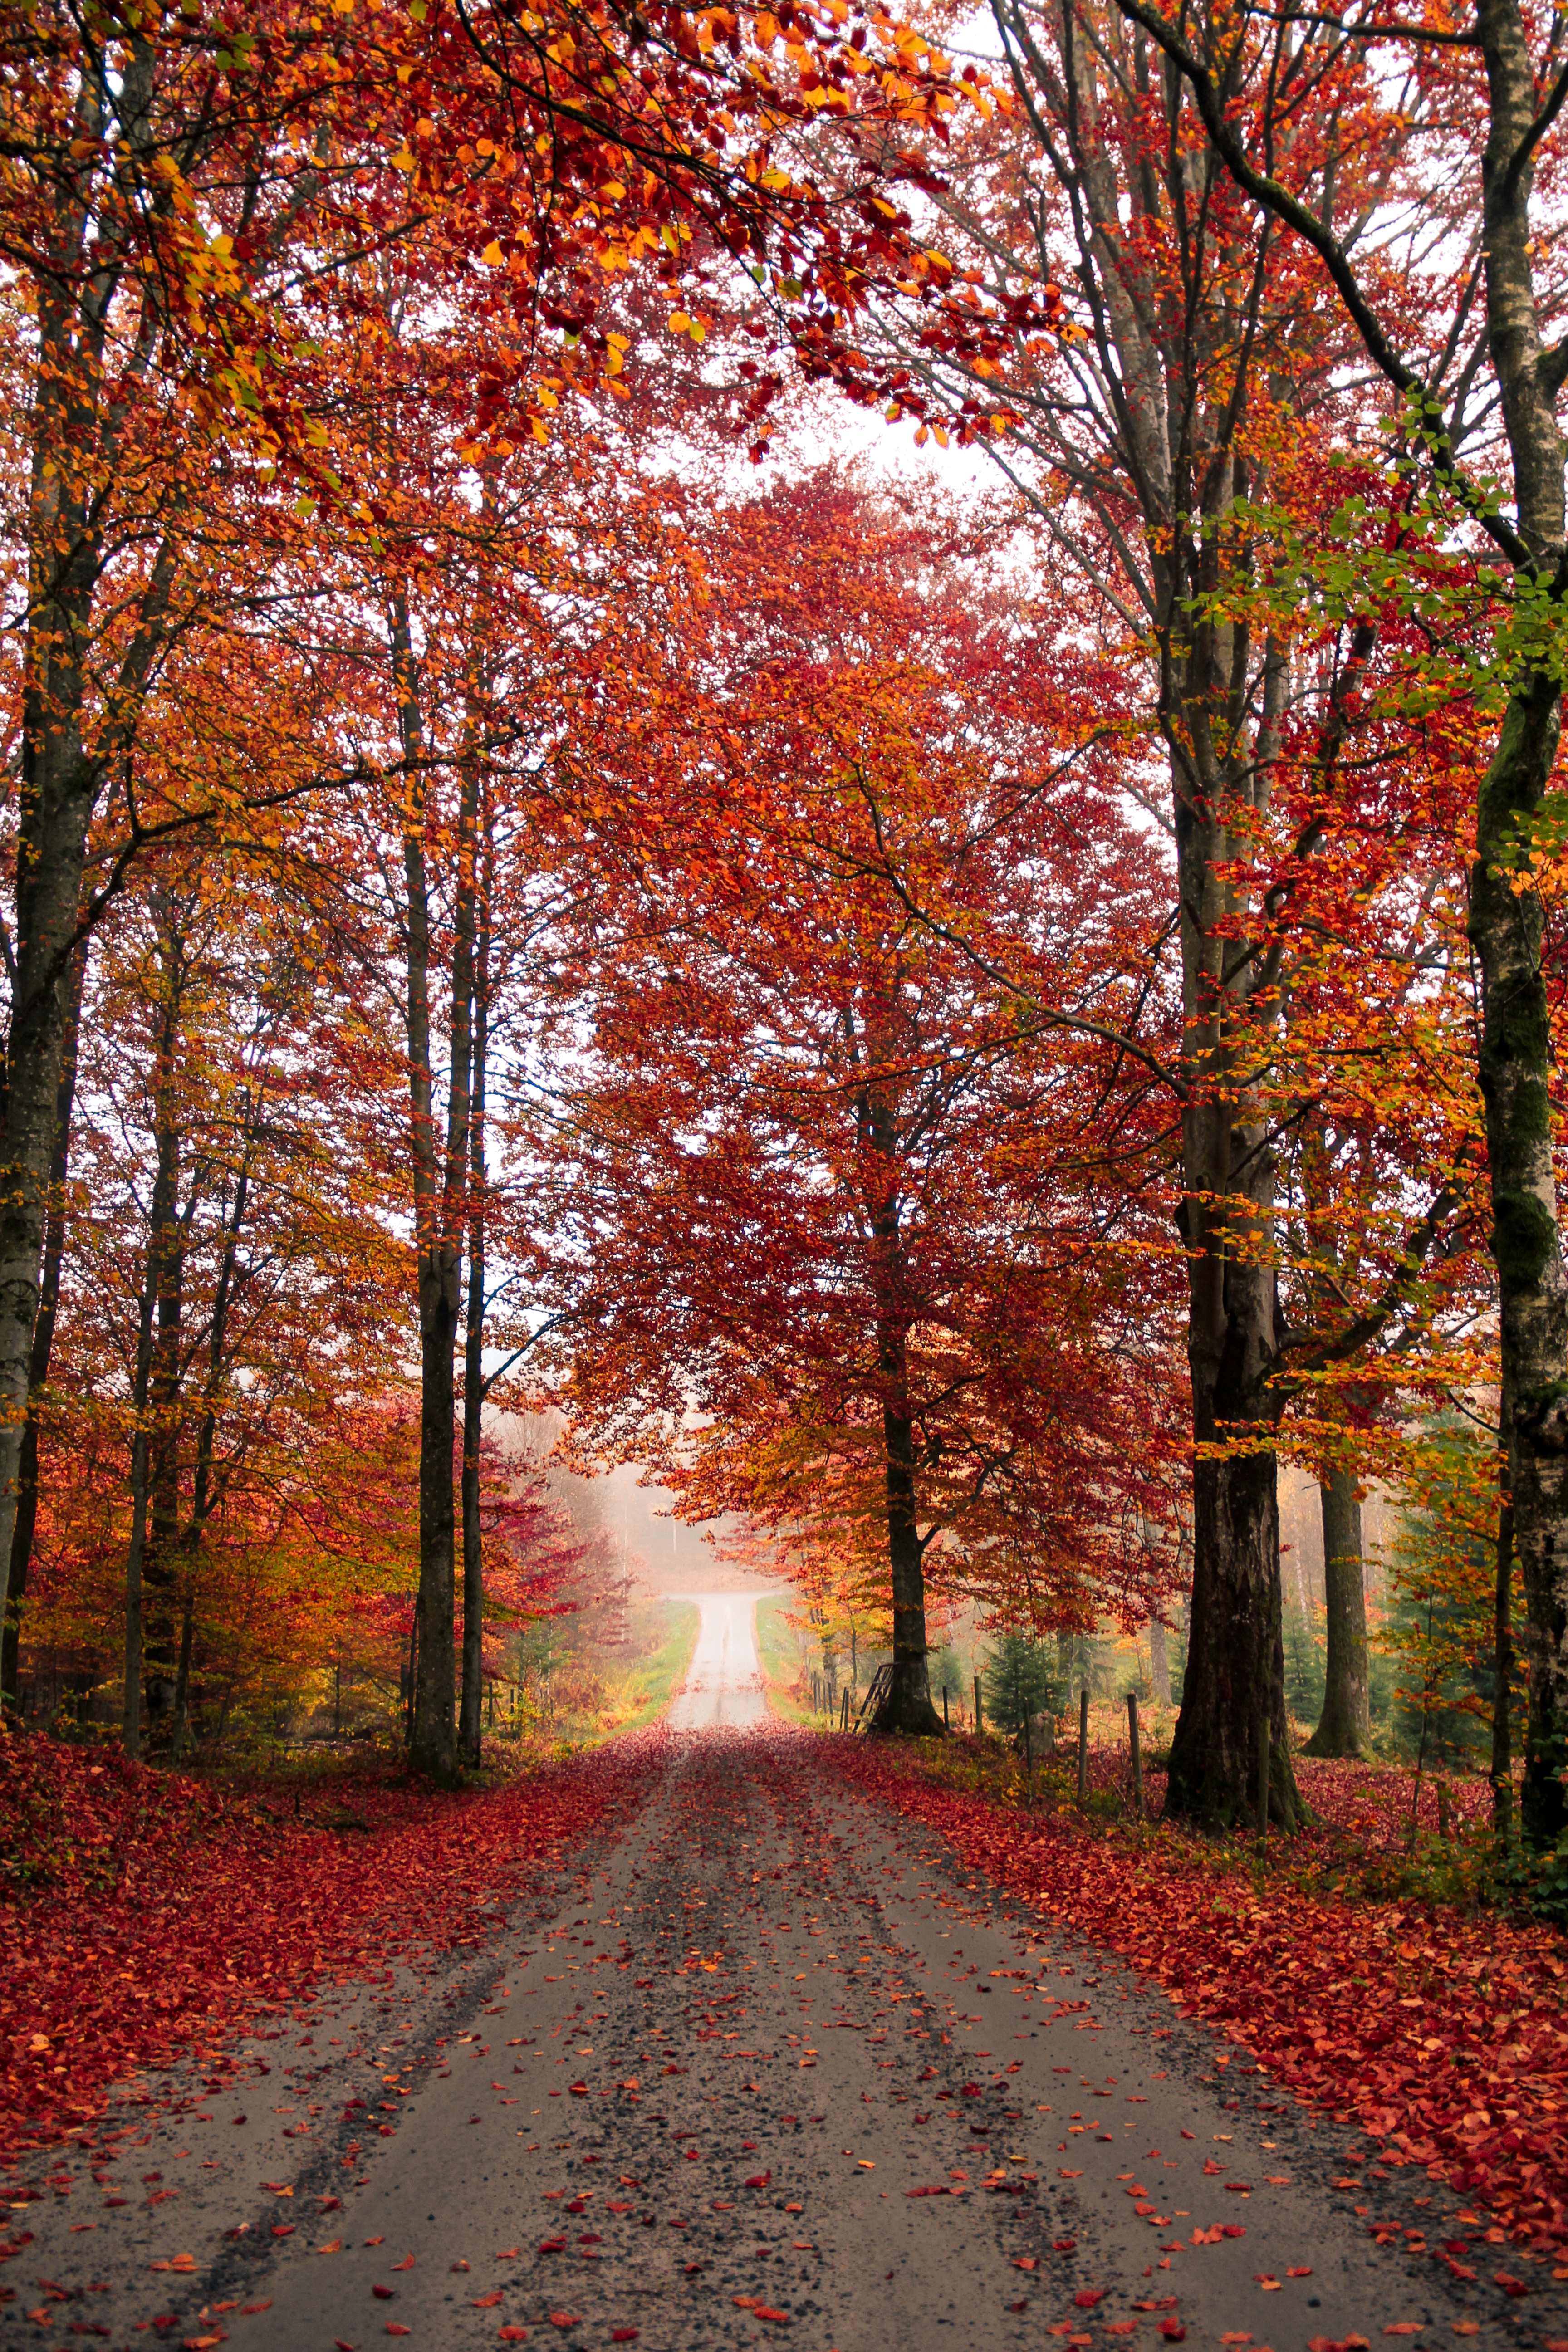 91910 download wallpaper nature, trees, autumn, road, foliage, fallen screensavers and pictures for free